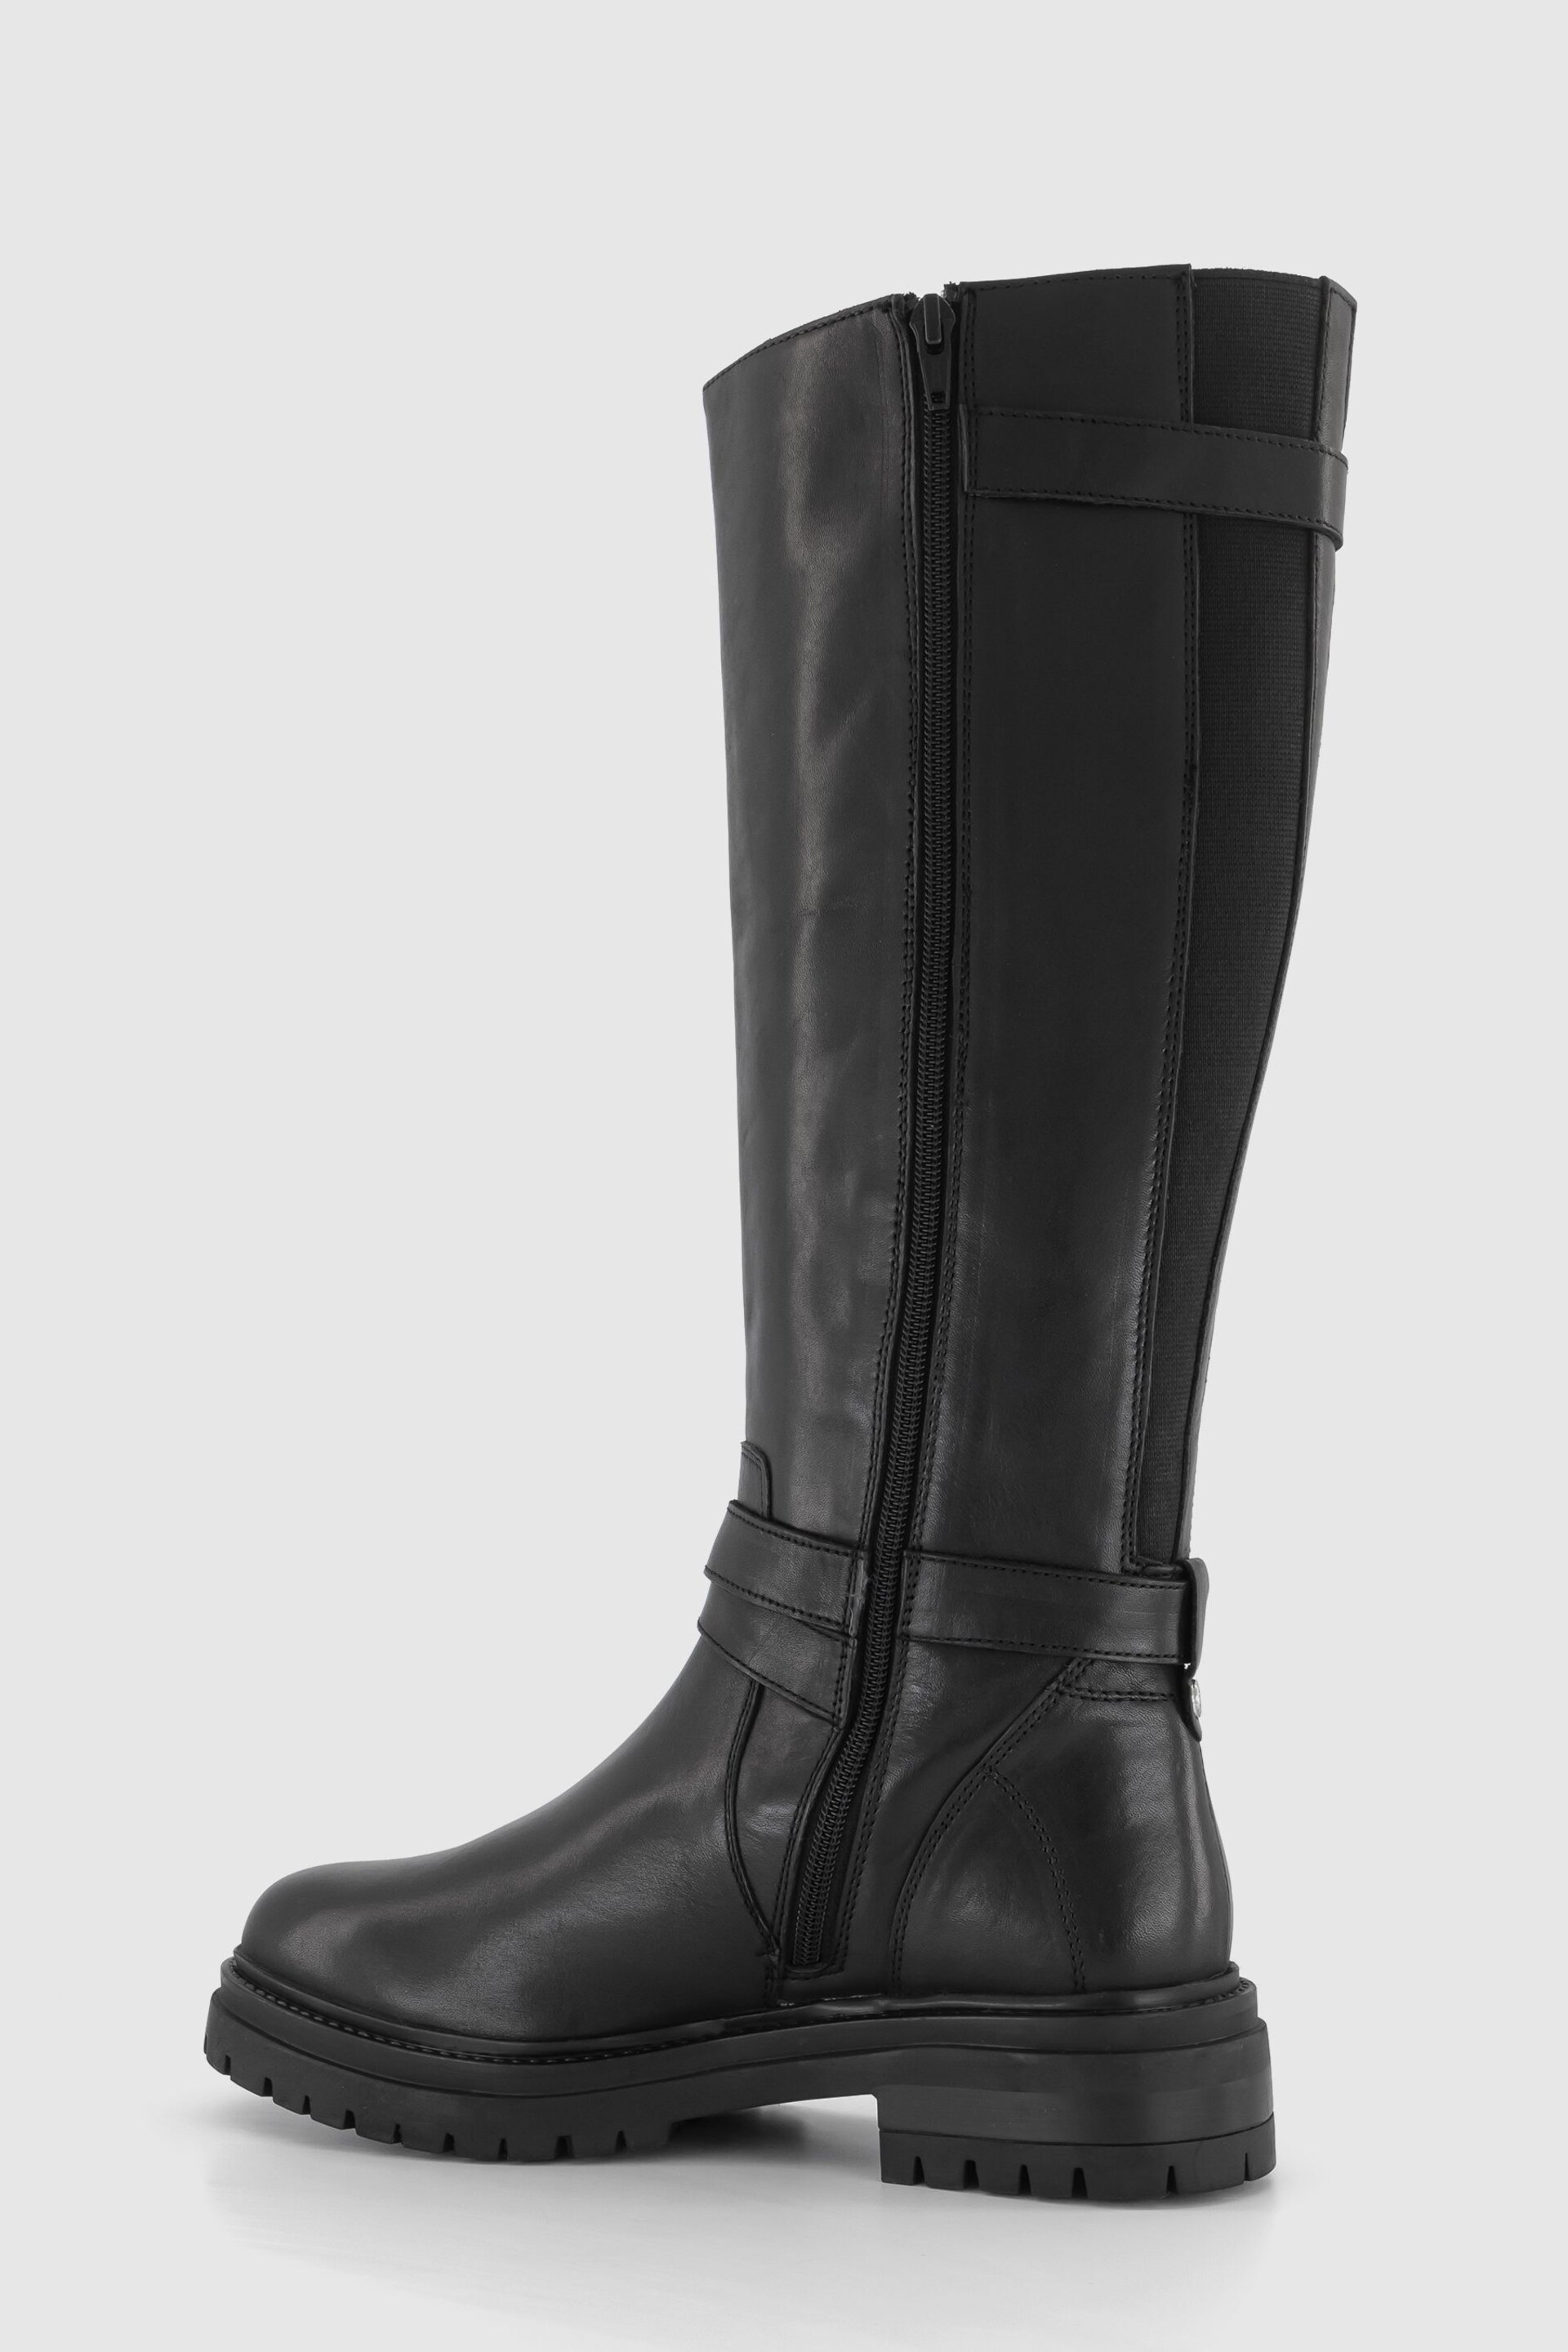 Office Black Leather Buckle Strap Krissy Knee High Rider Boots - Image 2 of 5